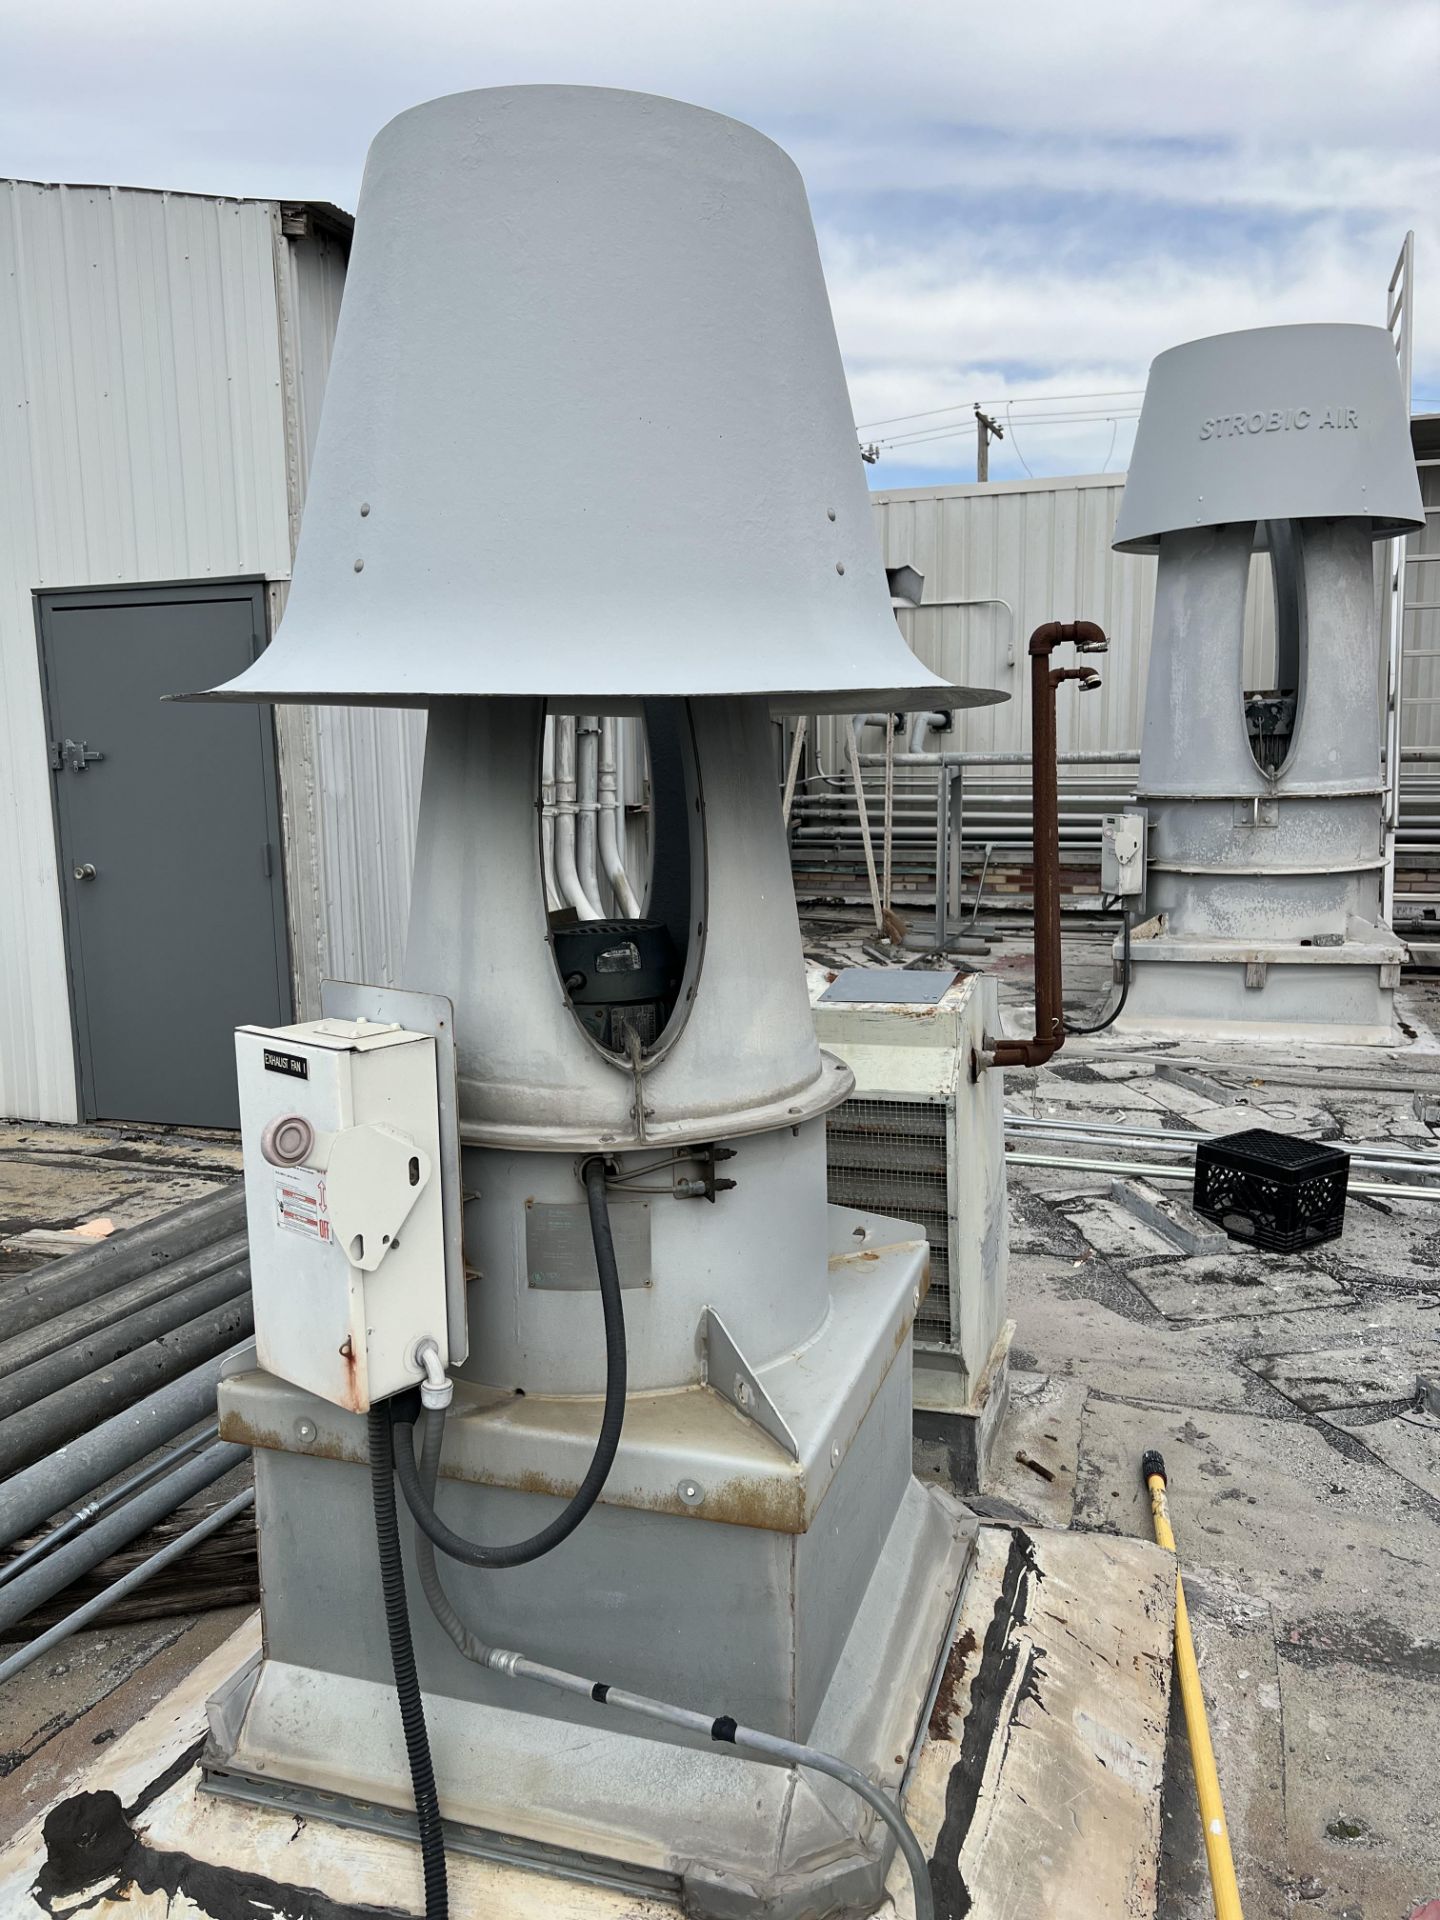 Strobic Air Exhaust Fans - Rigging Fee: $500 - Image 3 of 3